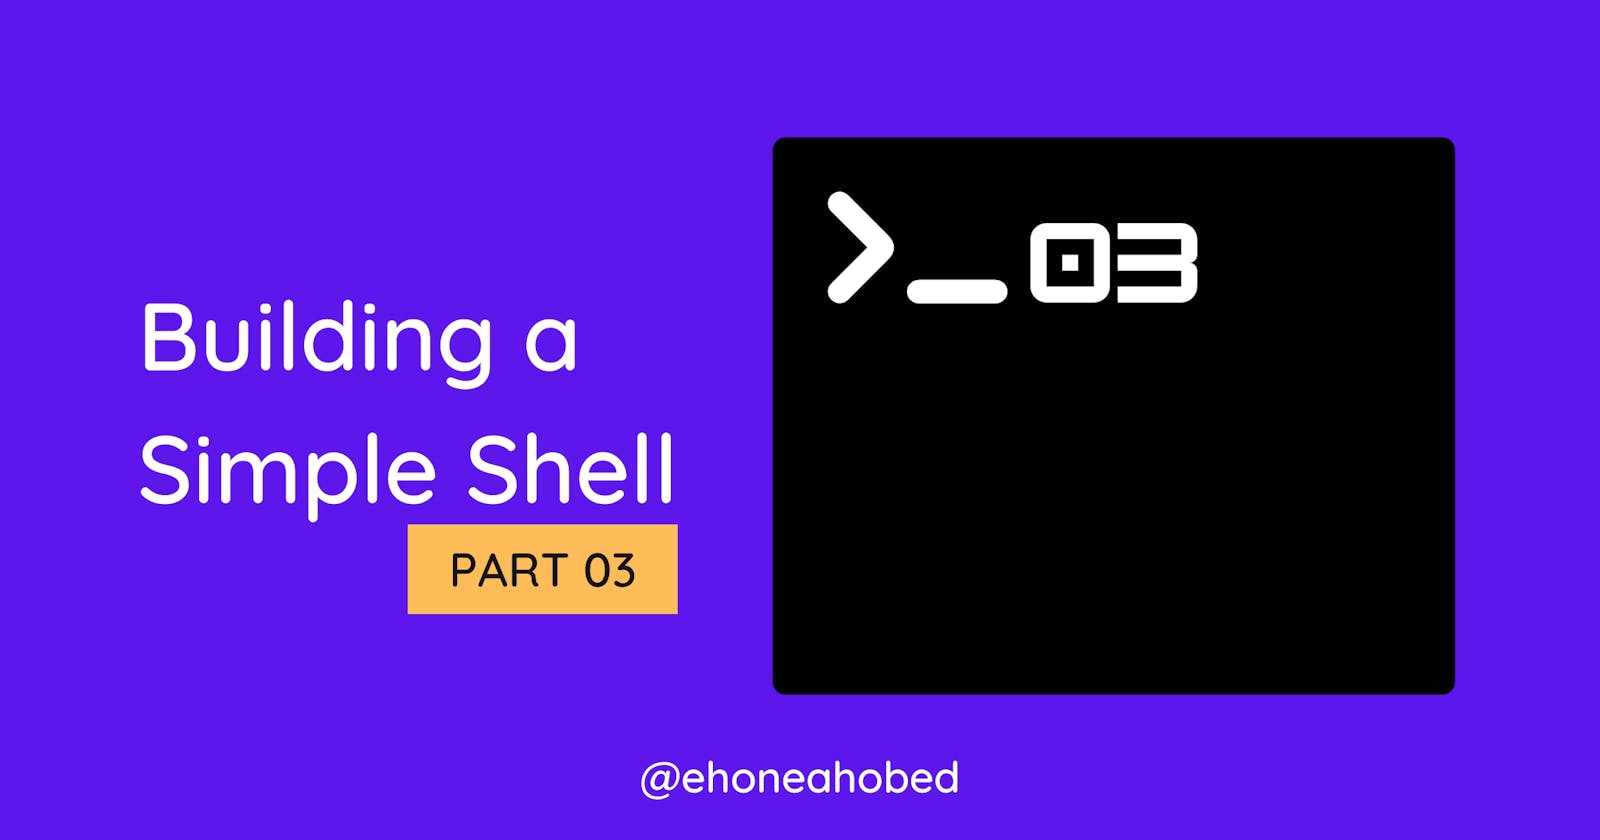 Building a simple shell in C - Part 3